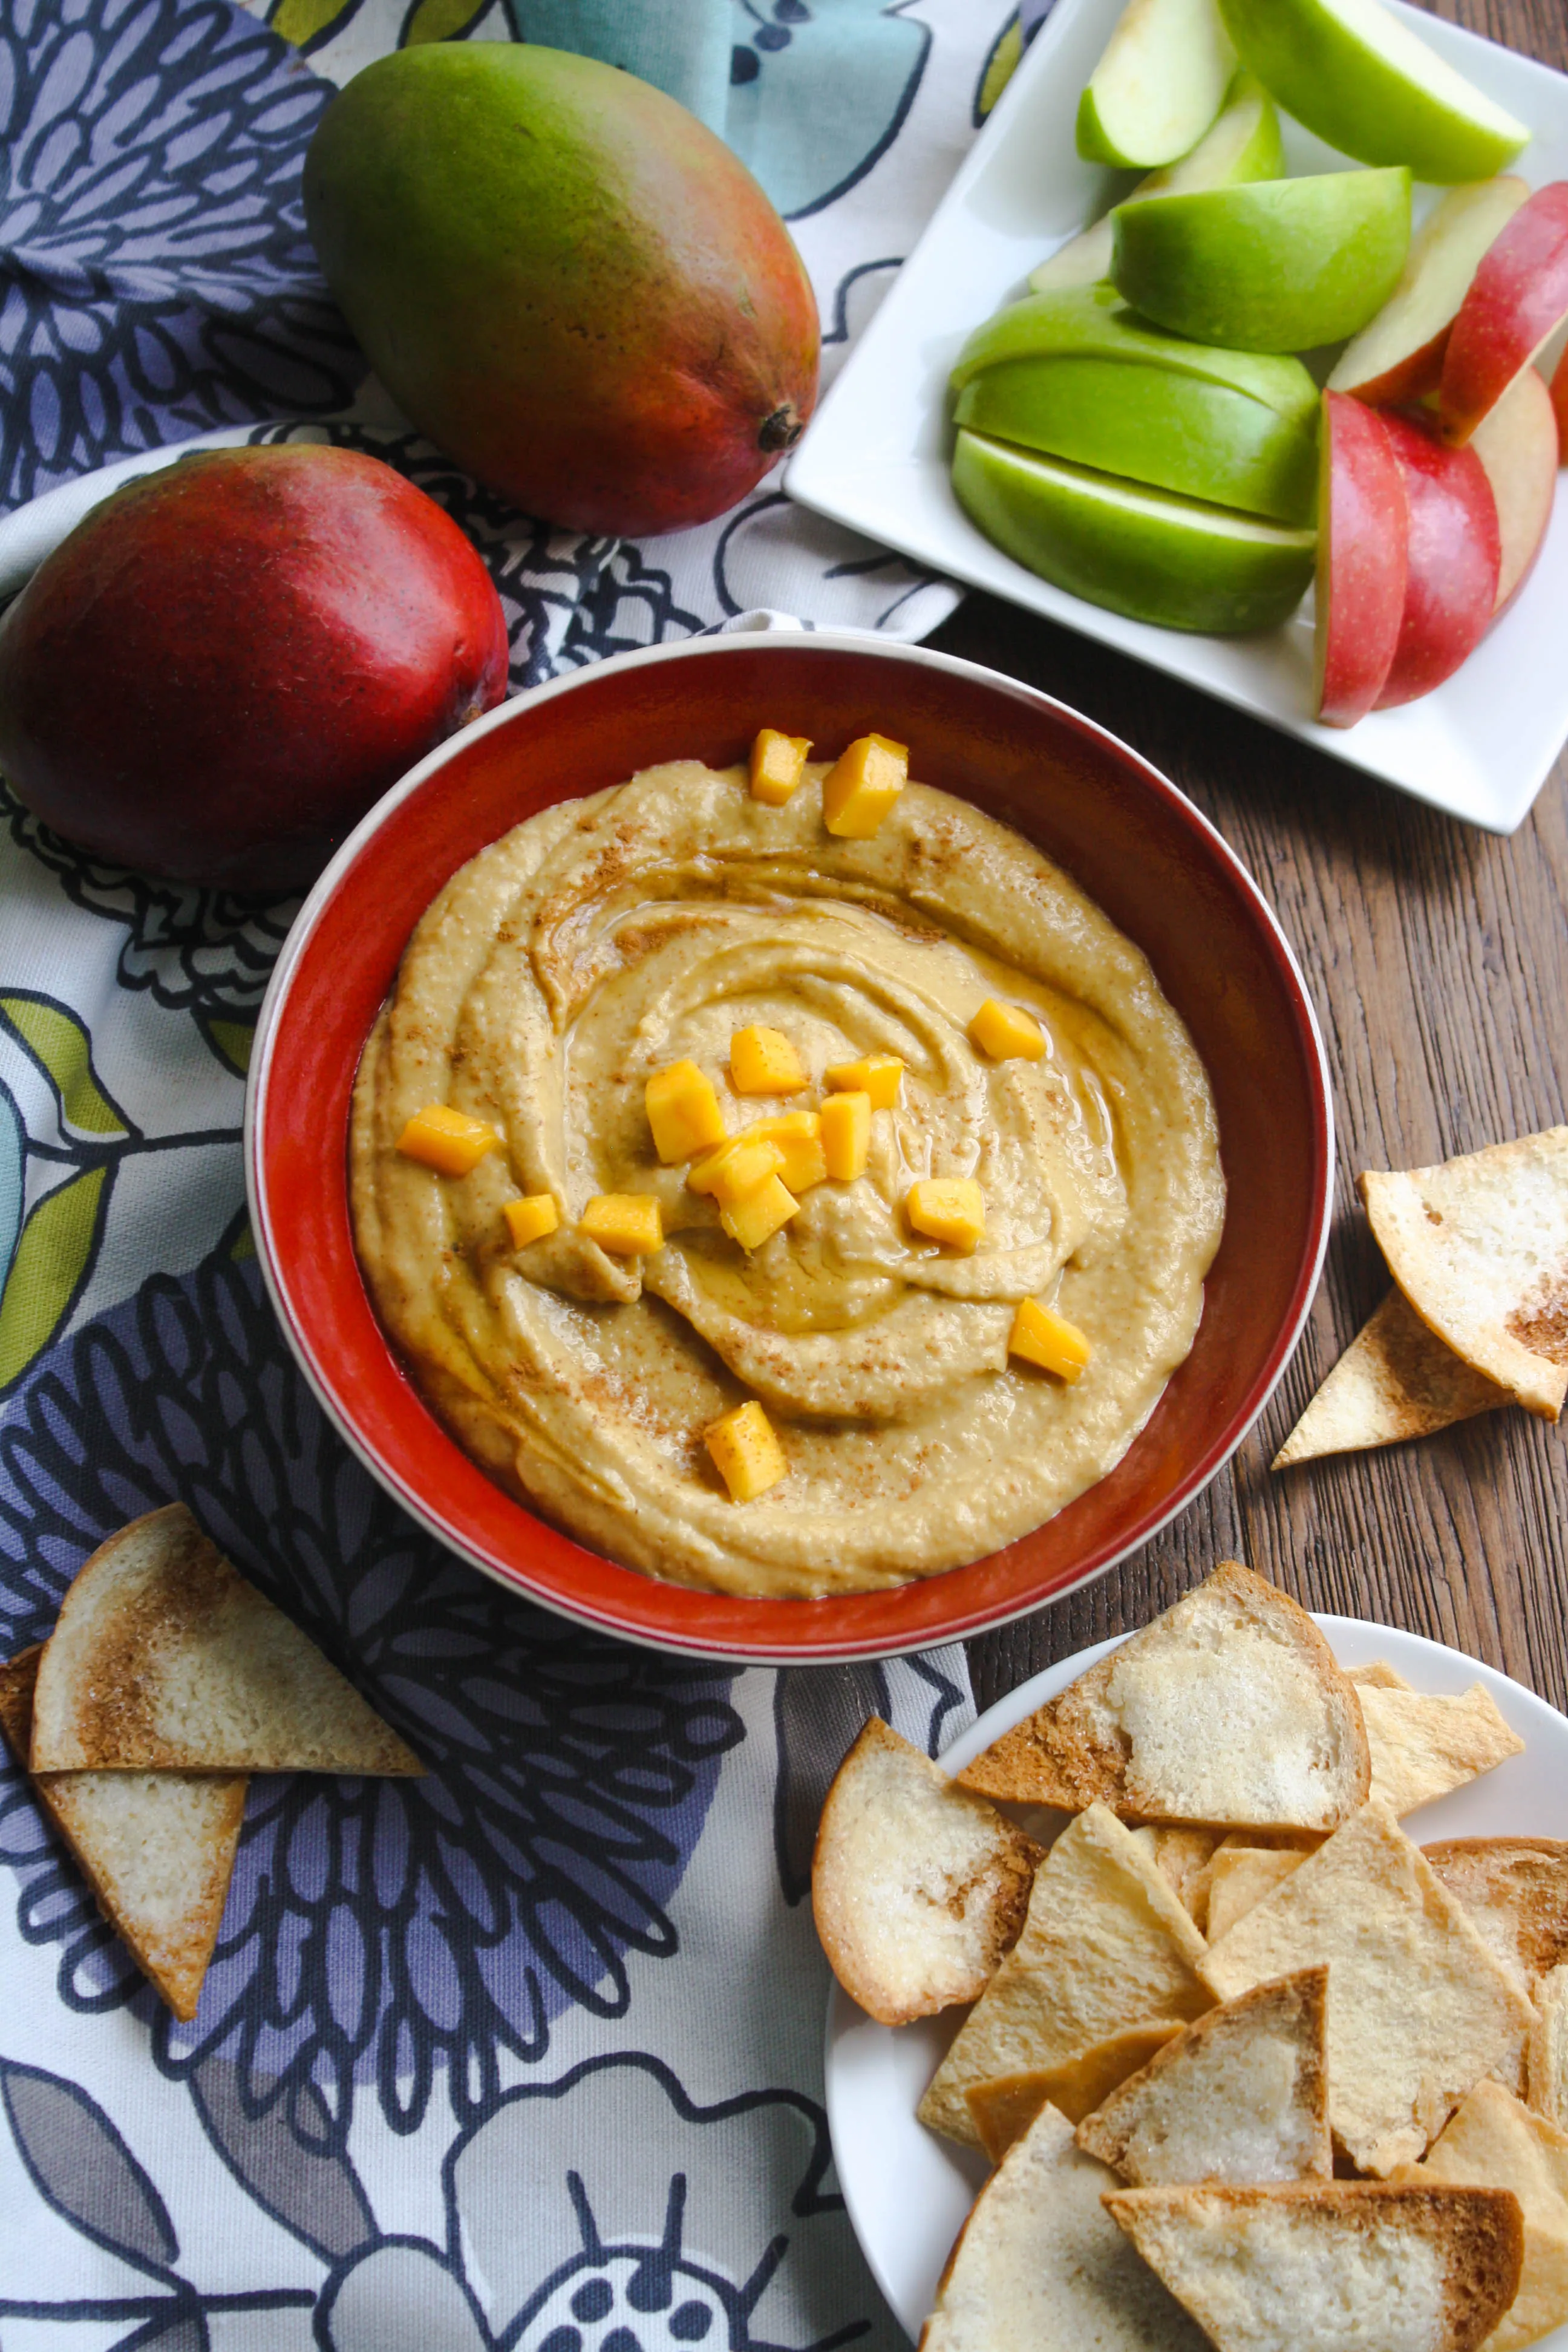 Honey-Mango Dessert Hummus is a lovely treat for a snack or dessert. Honey-Mango Dessert Hummus is easy to make and you'll love how it tastes!